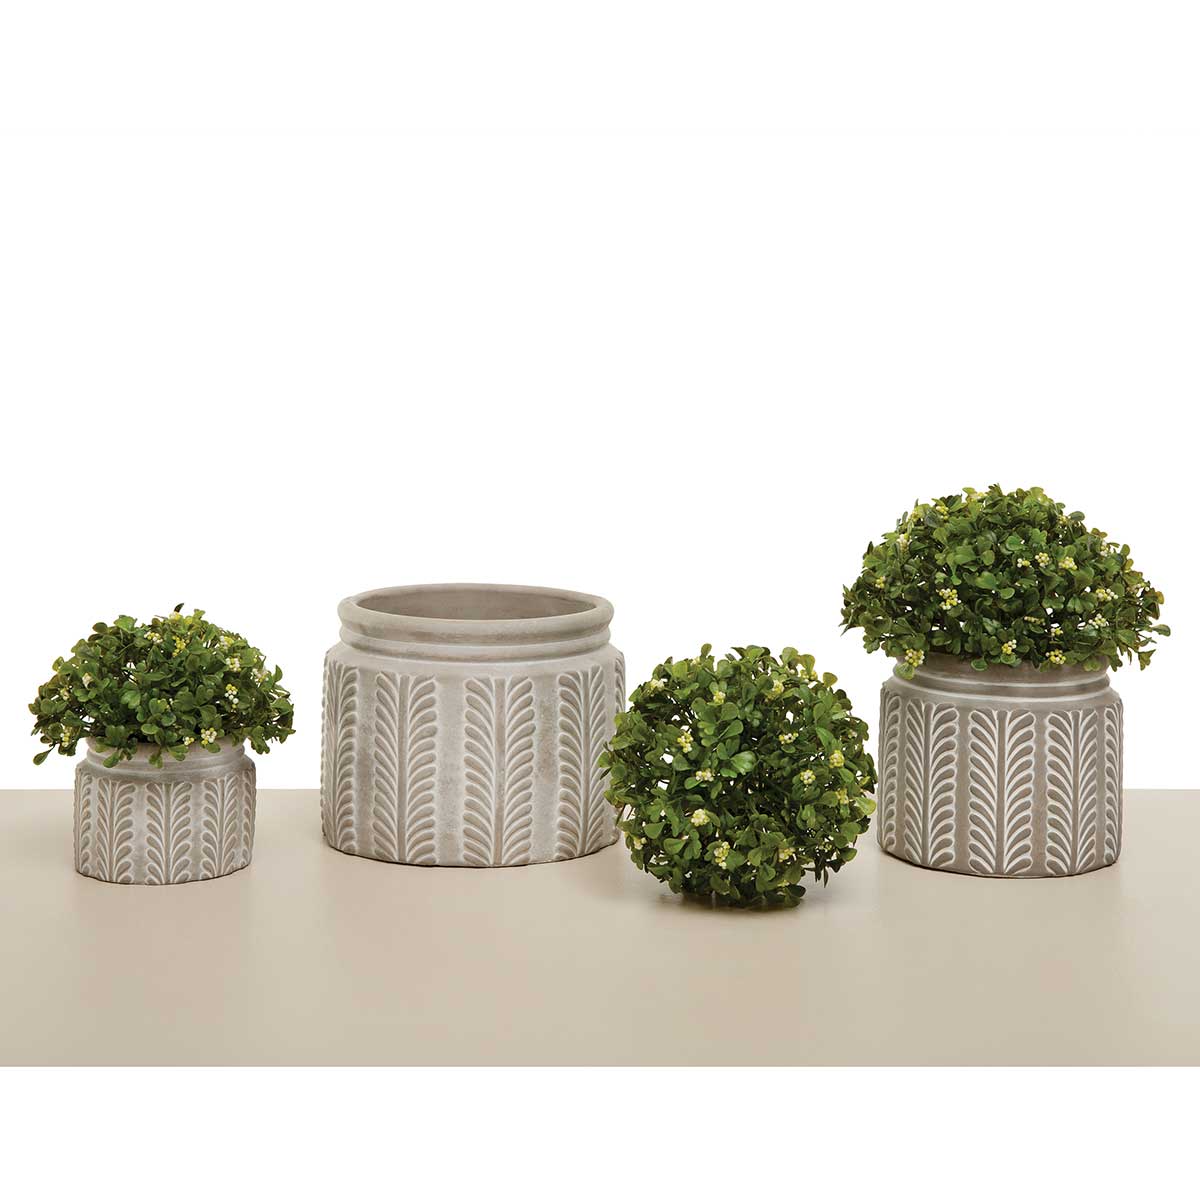 DOME BOXWOOD WITH BERRIES LARGE 6.5IN X 3IN GREEN/WHITE